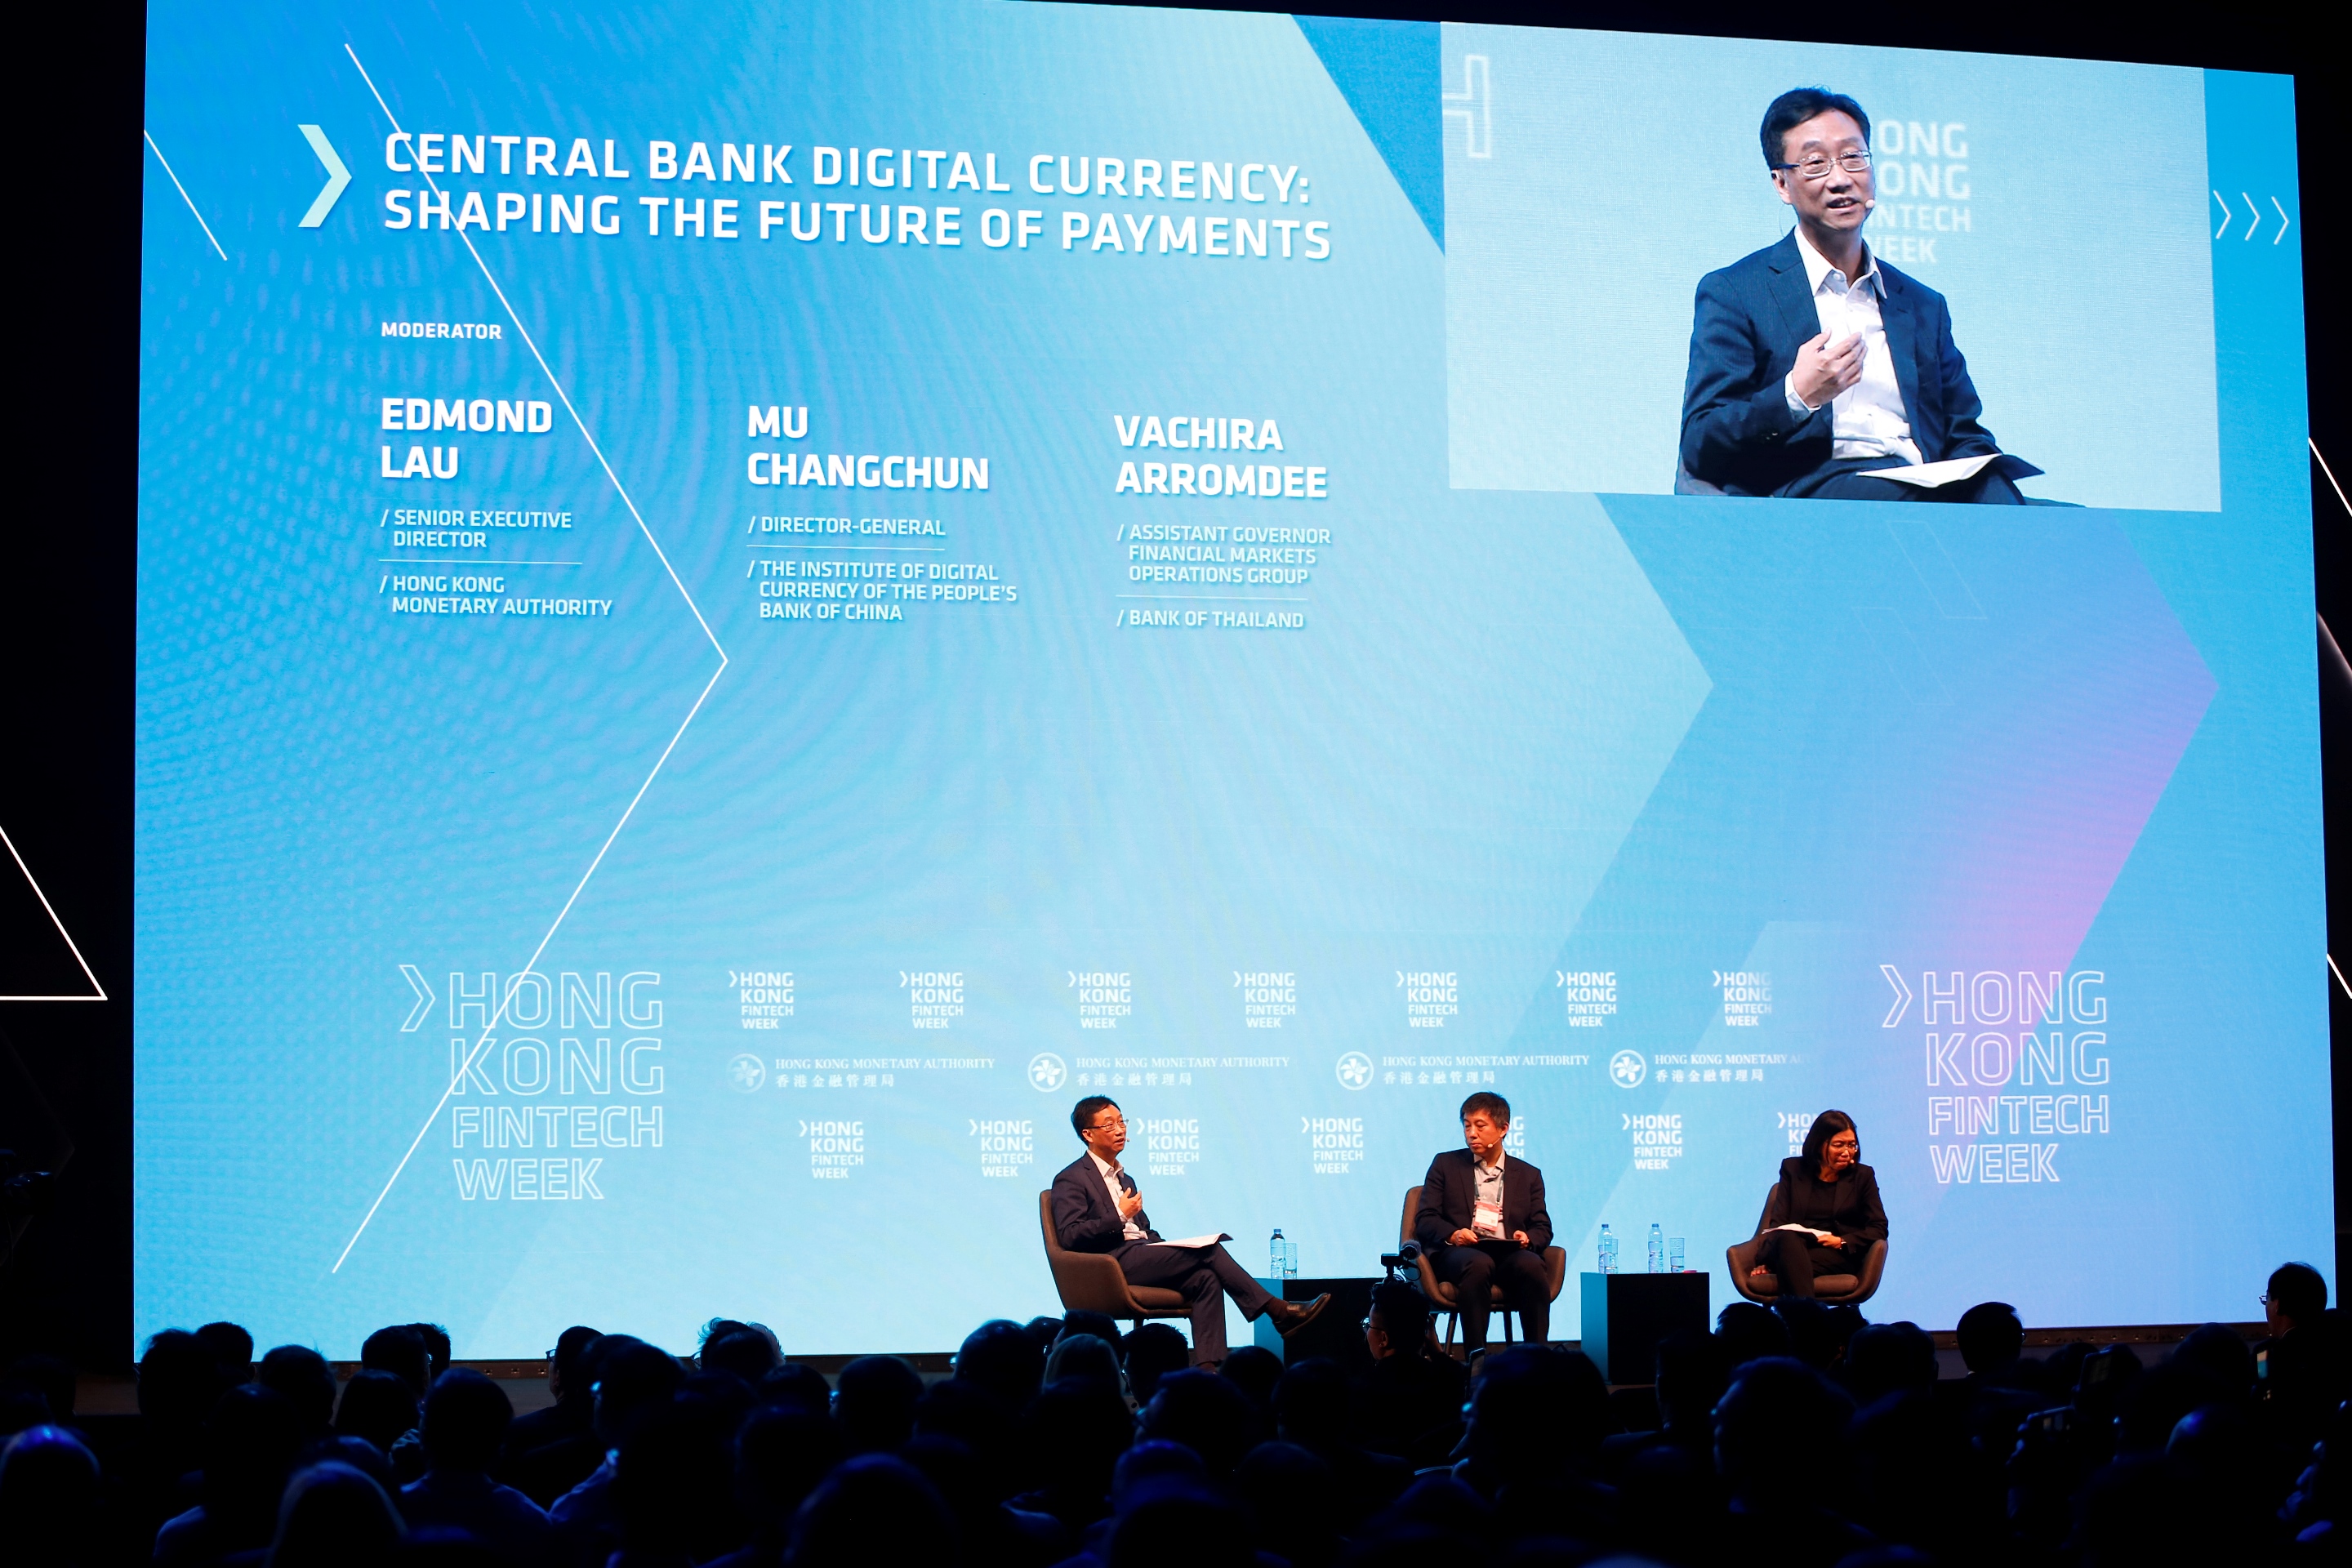 Mr Edmond Lau, Senior Executive Director of the HKMA, moderates a panel discussion on how Central Bank Digital Currency could shape the future of cross-border payments.